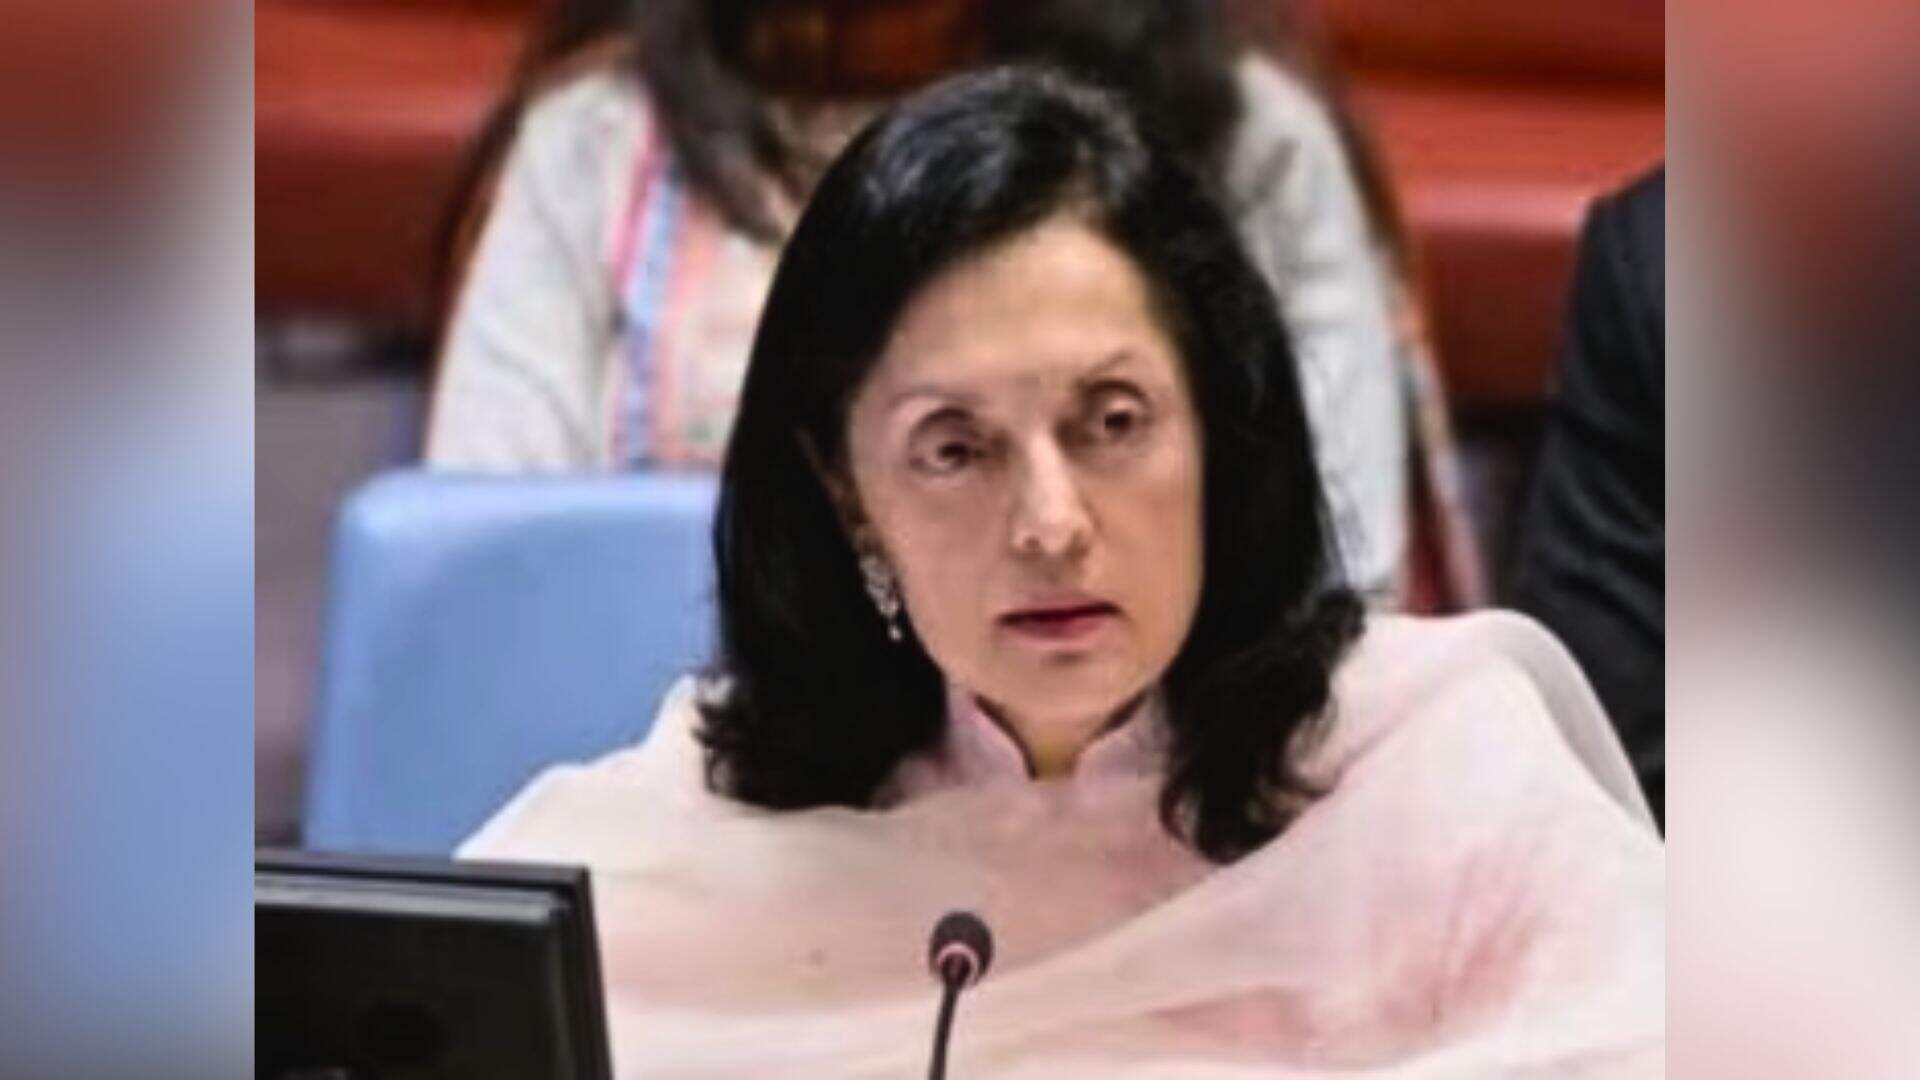 India Slams Pakistan at UN, Advocates Culture of Peace Amid Global Challenges